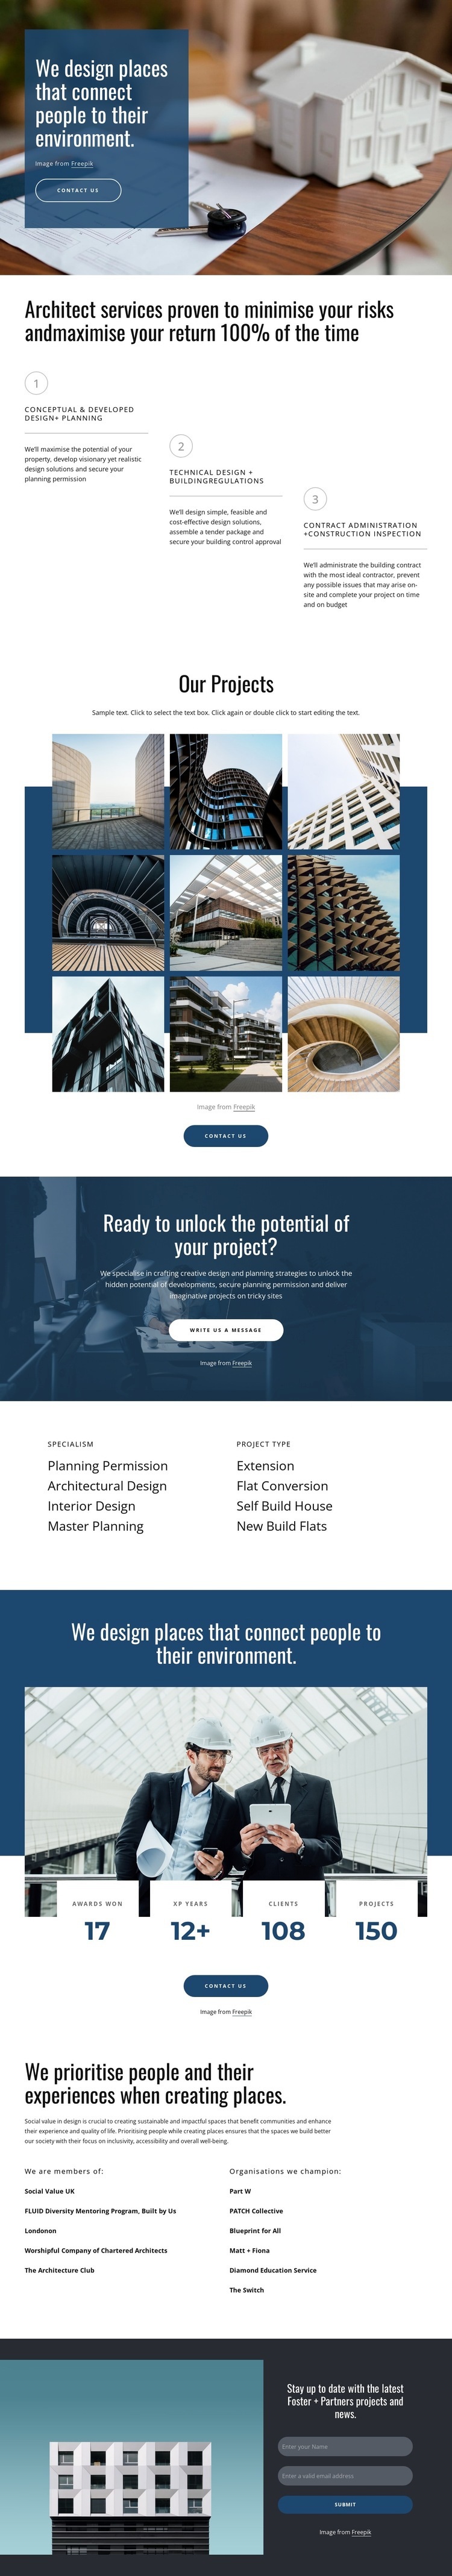 We design amazing projects Homepage Design